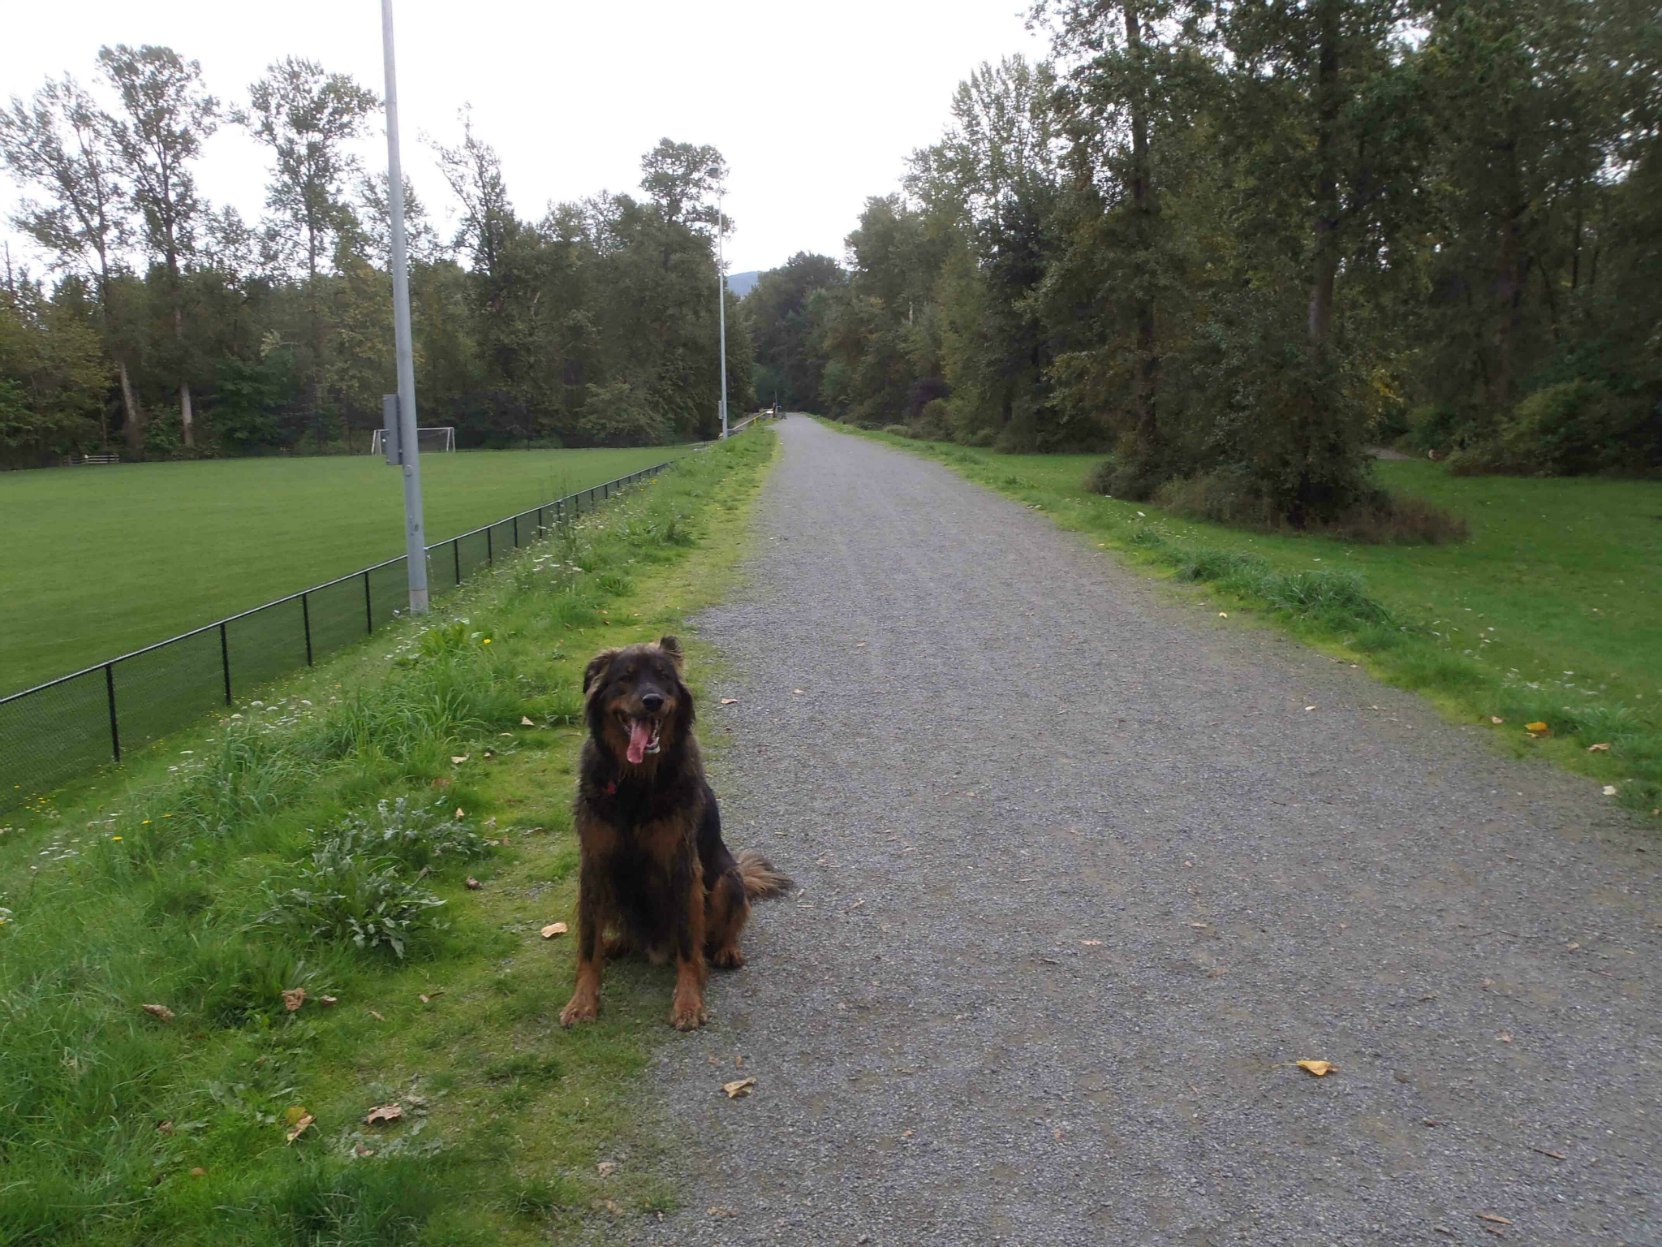 Our dog Buck on the dike in MacAdam Park.